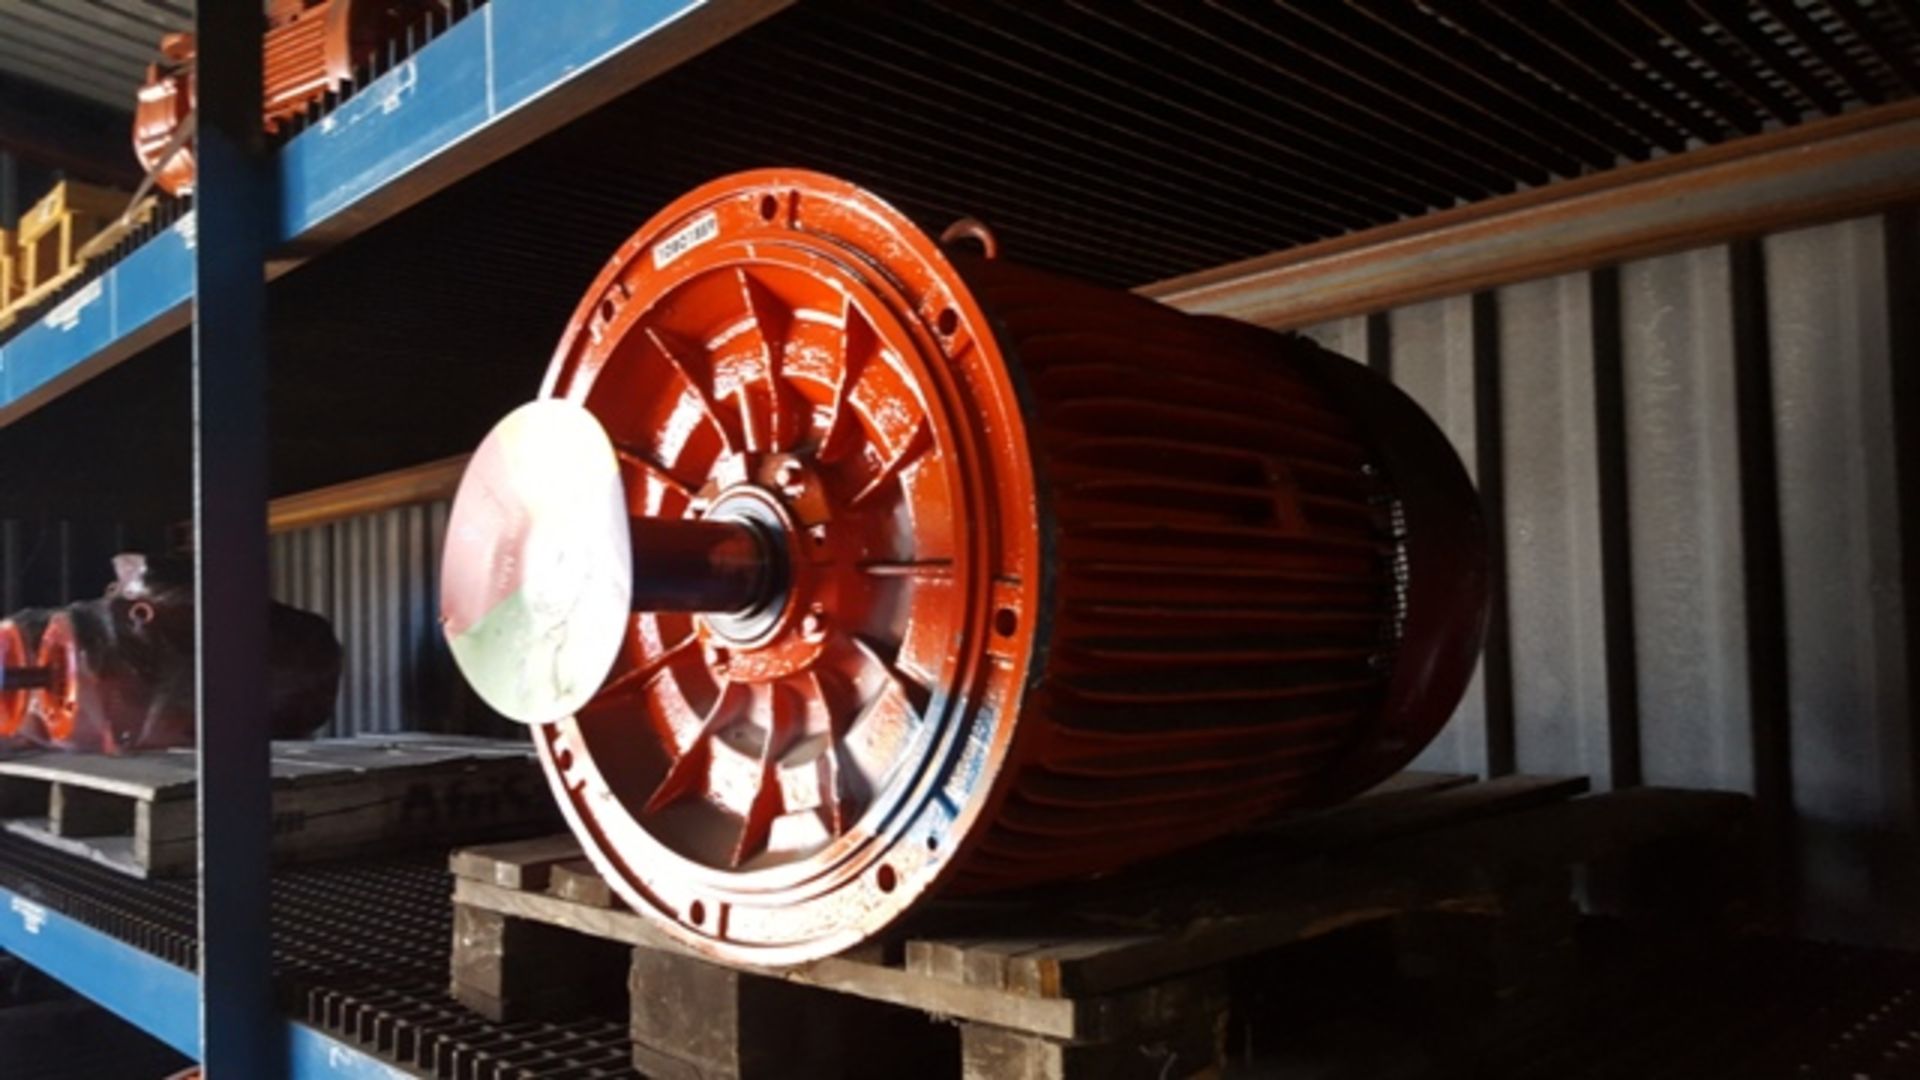 55KW ELECTRIC MOTOR (10801859) (LOCATED IN HOTAZEL, NC)